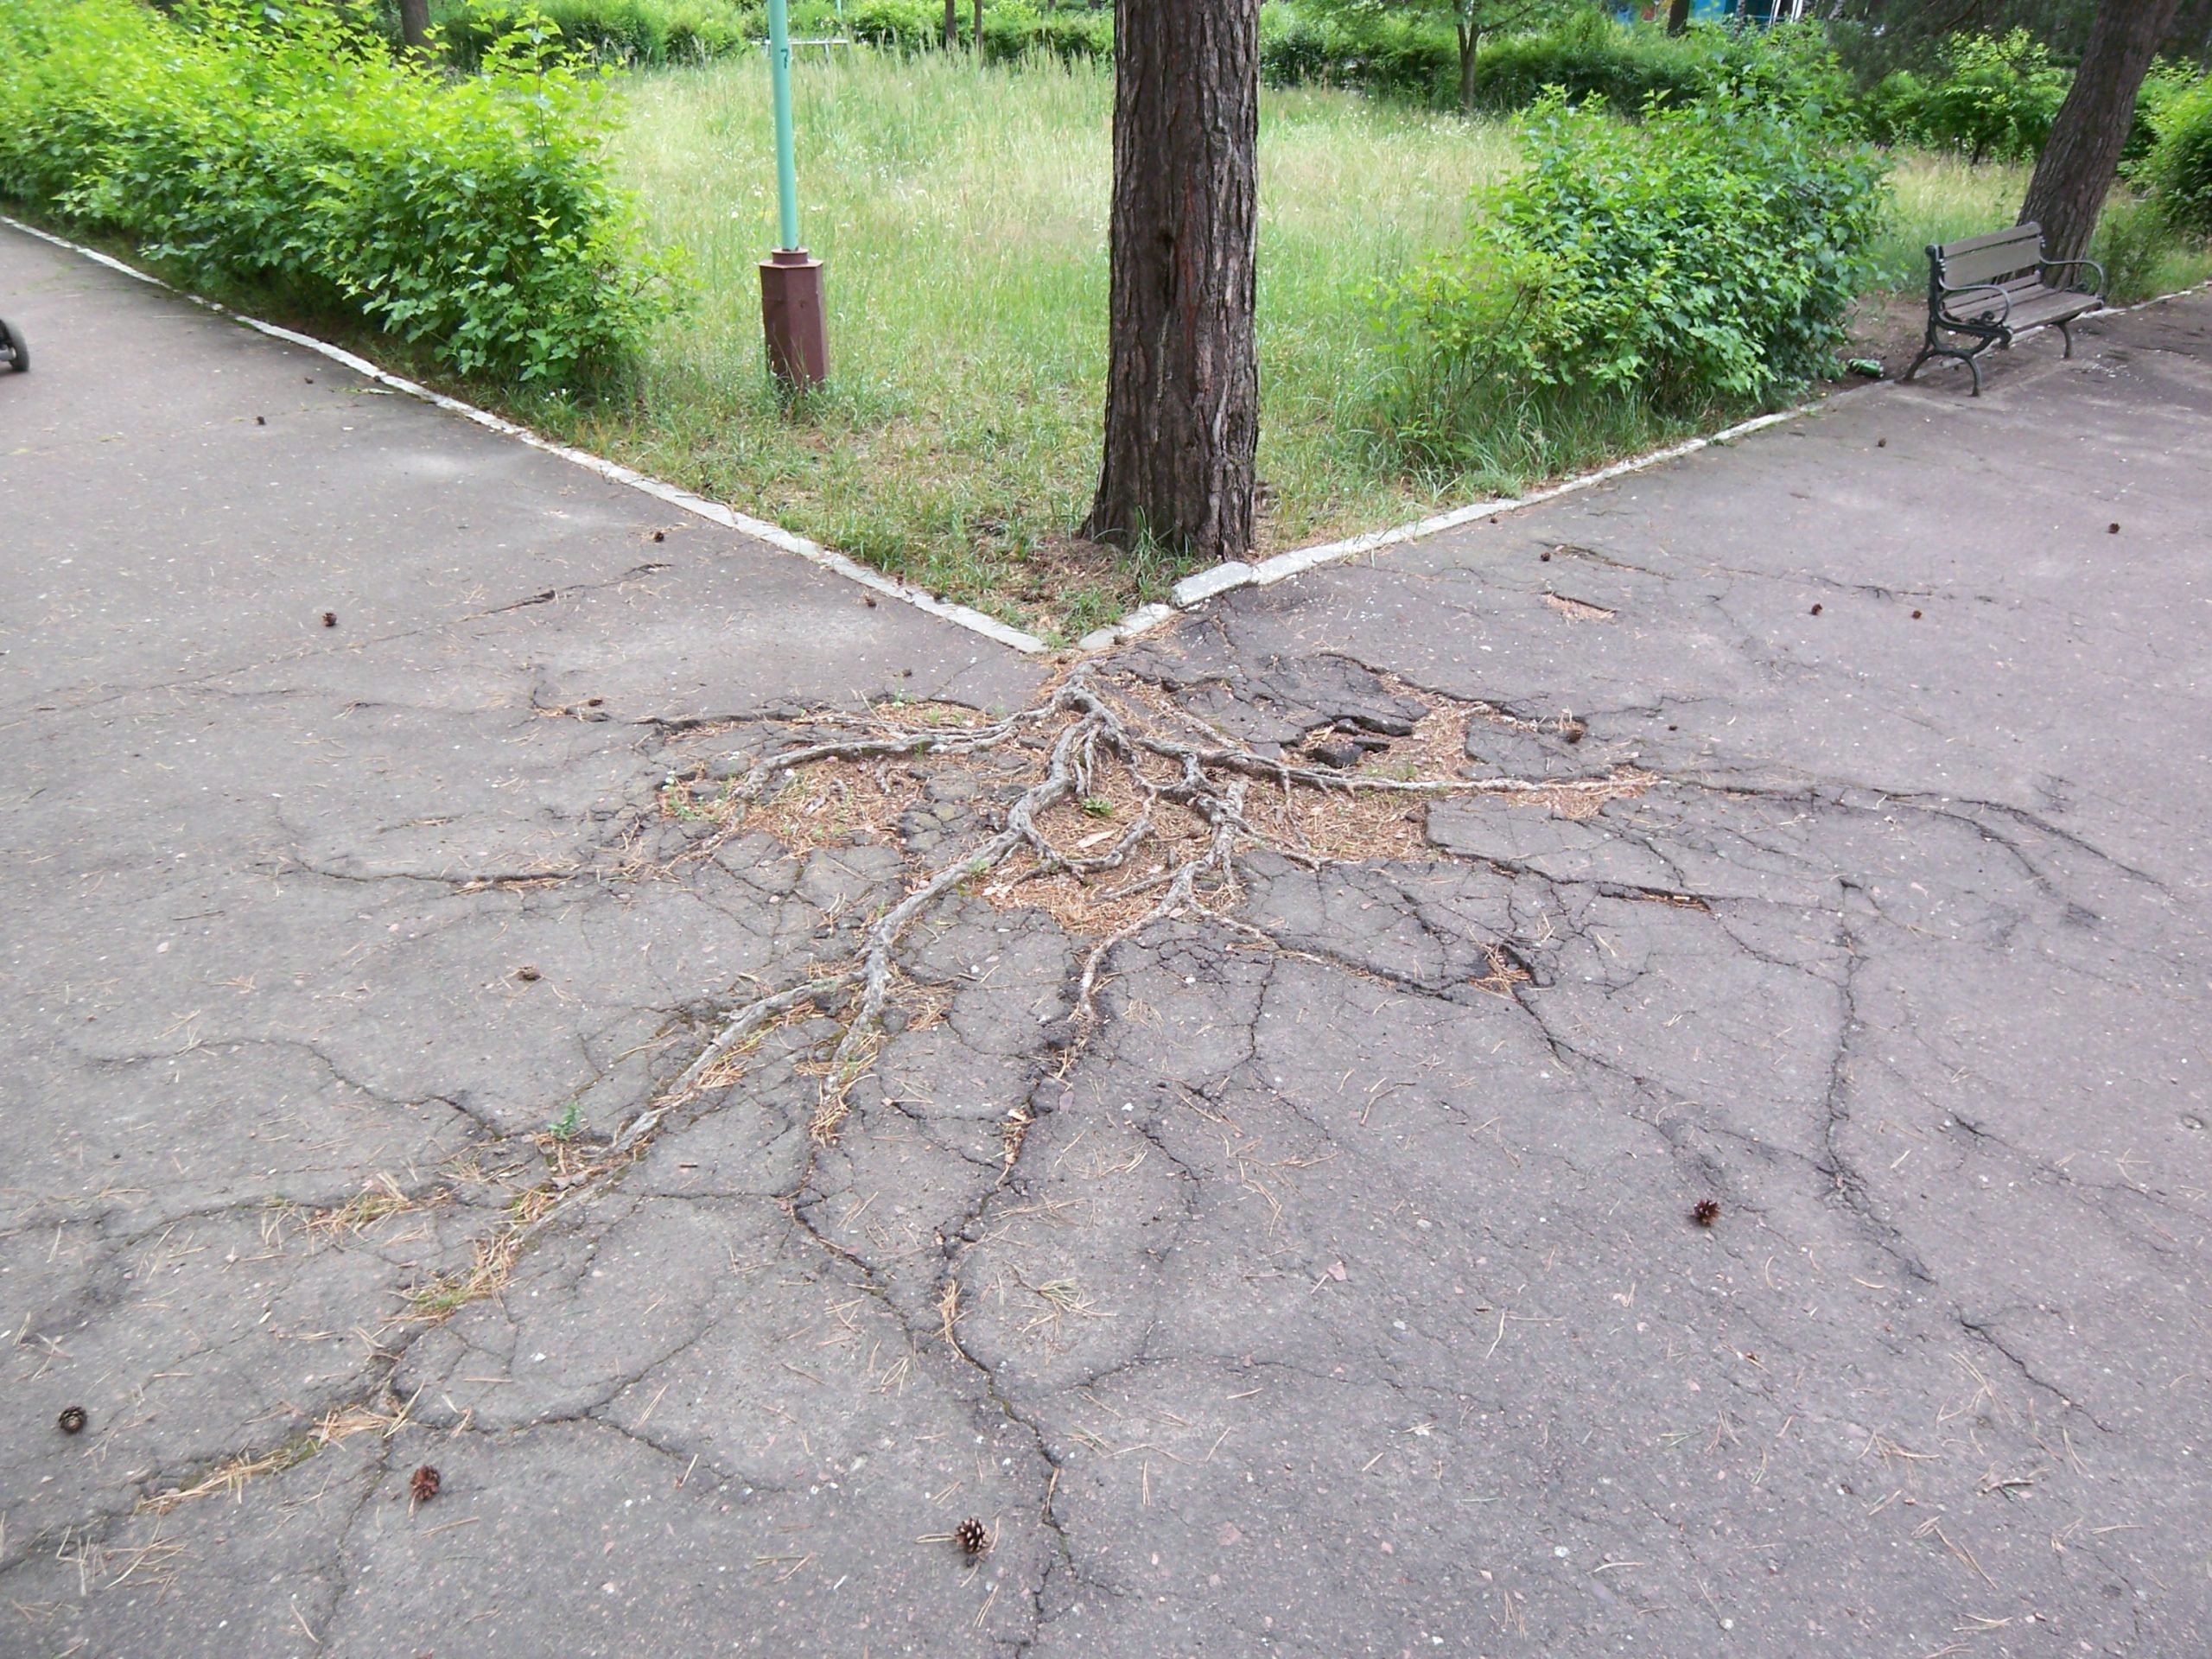 The roots of the tree are breaking up the asphalt.